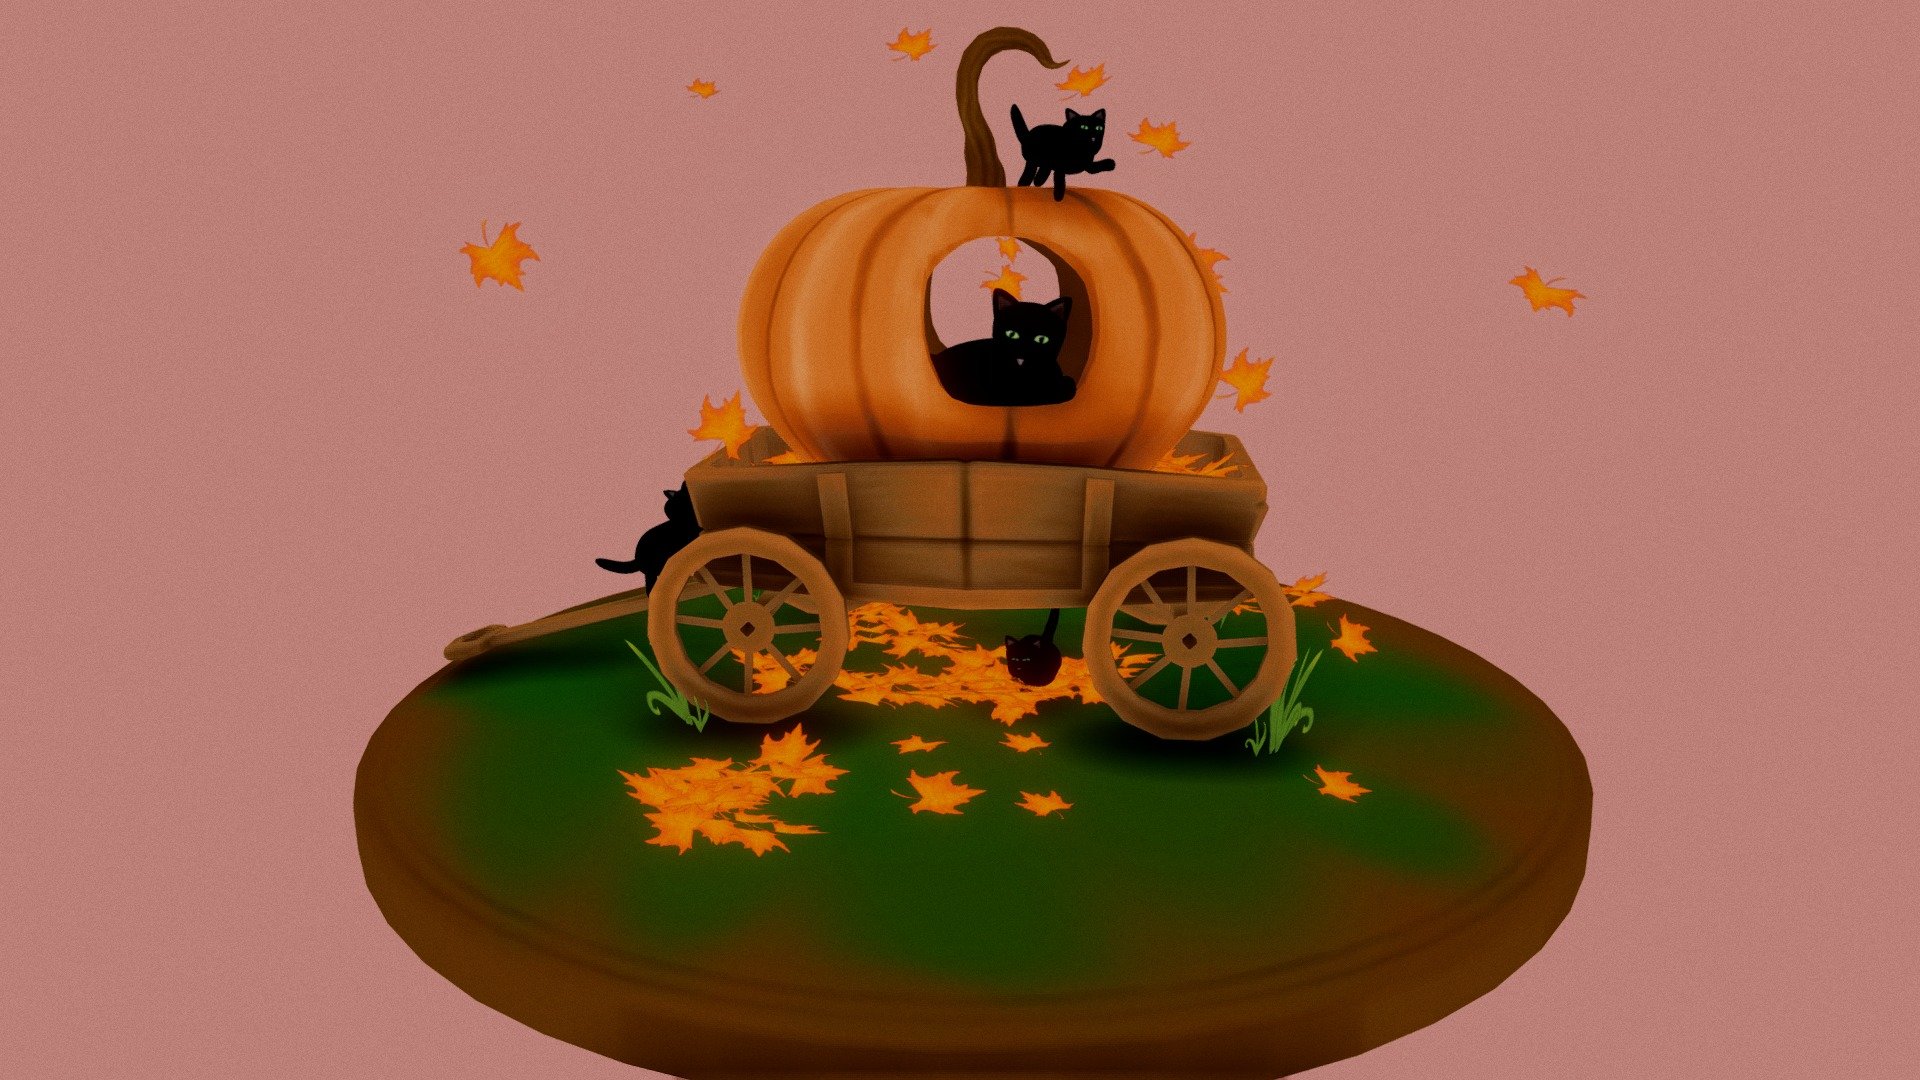 Cats playing with leaves carted around with a pumpkin. Happy Autumn everyone! - Autumn Wishes - 3D model by JessSwynn 3d model